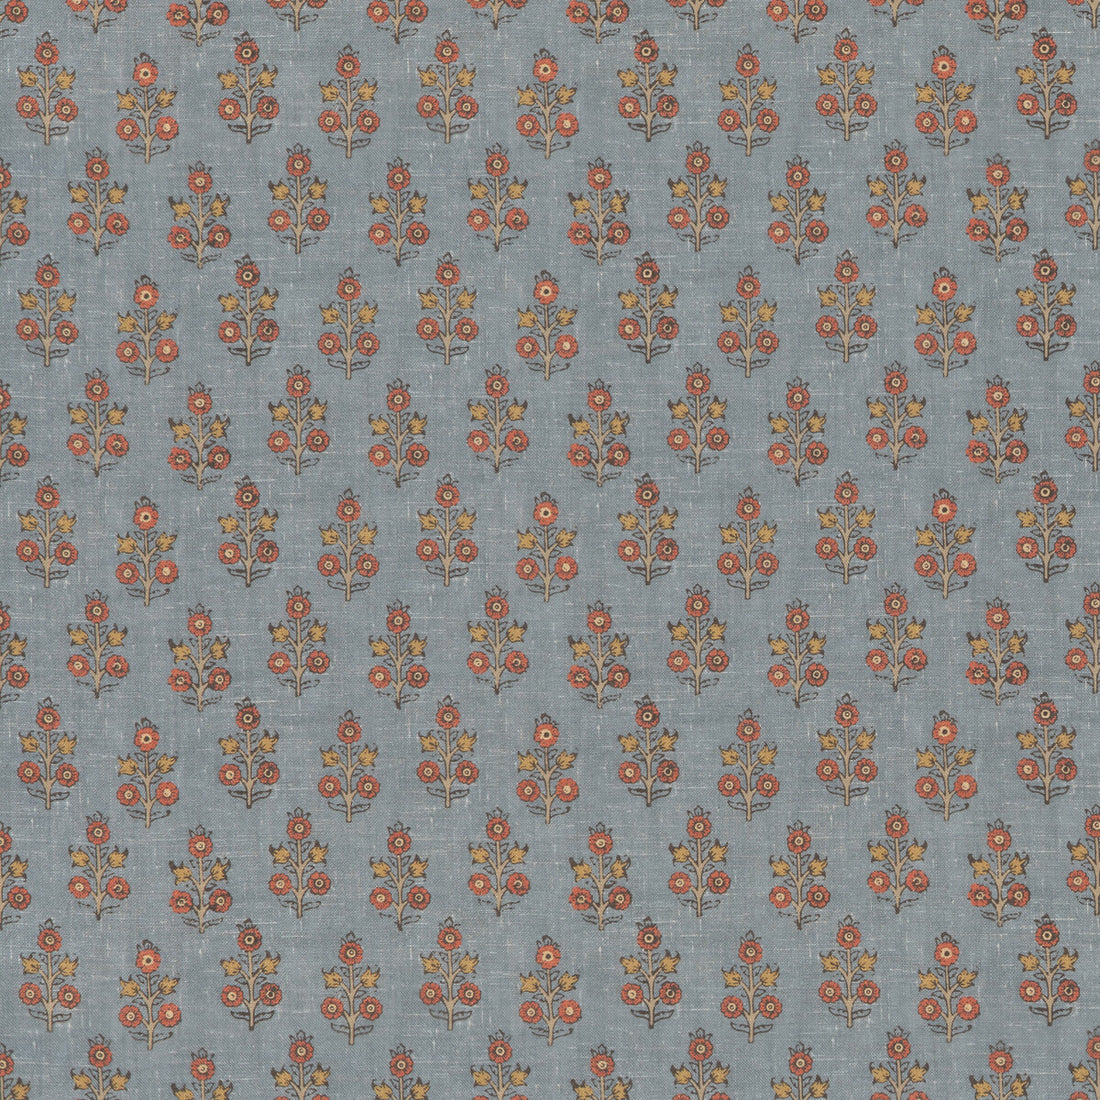 Poppy Sprig fabric in denim color - pattern BP11003.1.0 - by G P &amp; J Baker in the House Small Prints collection